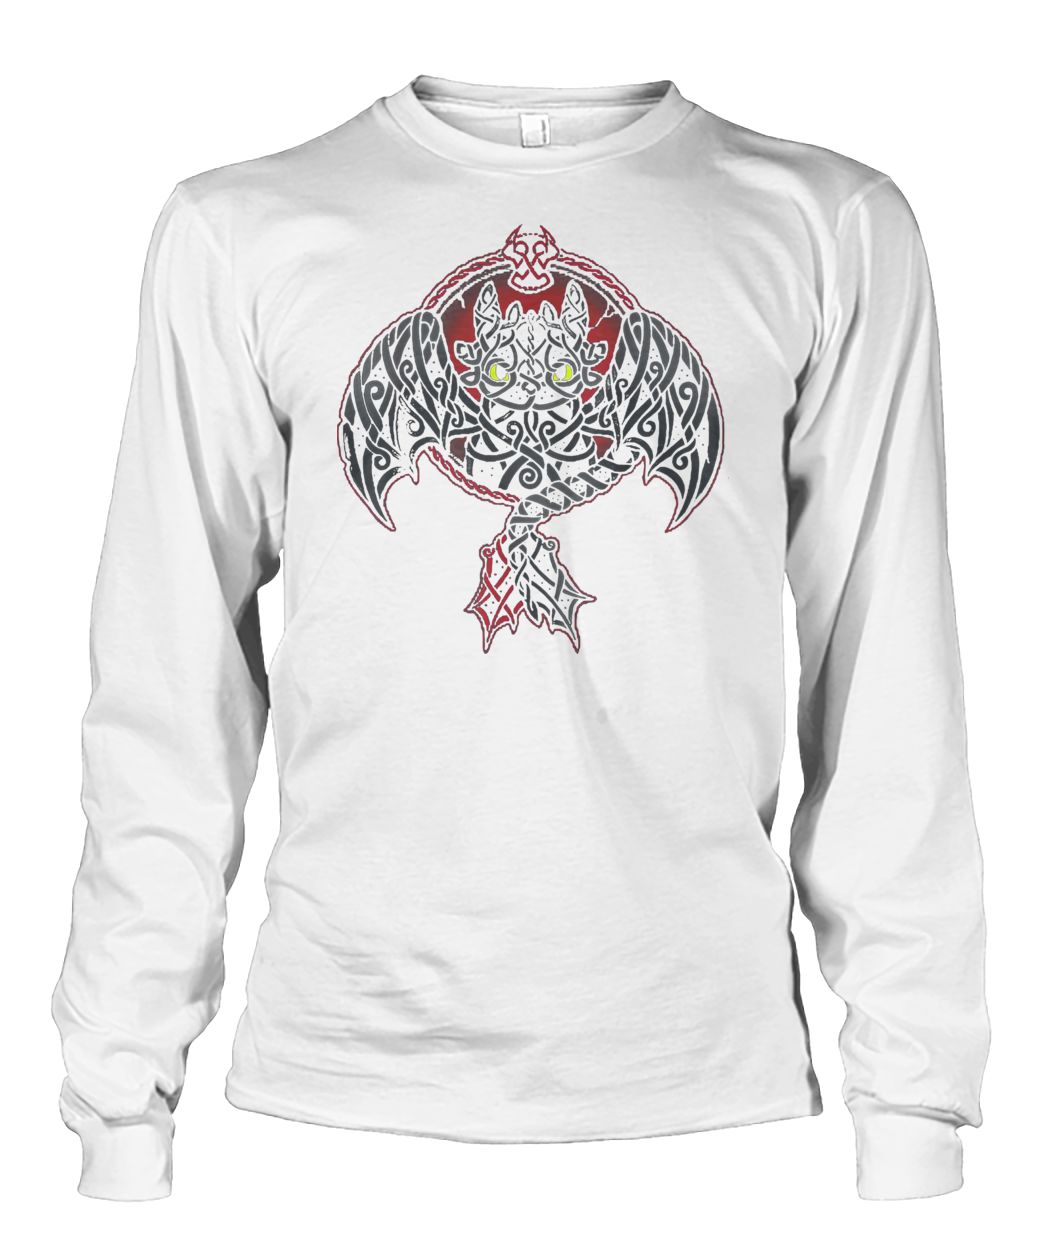 How to train your dragon viking toothless night fury unisex long sleeve